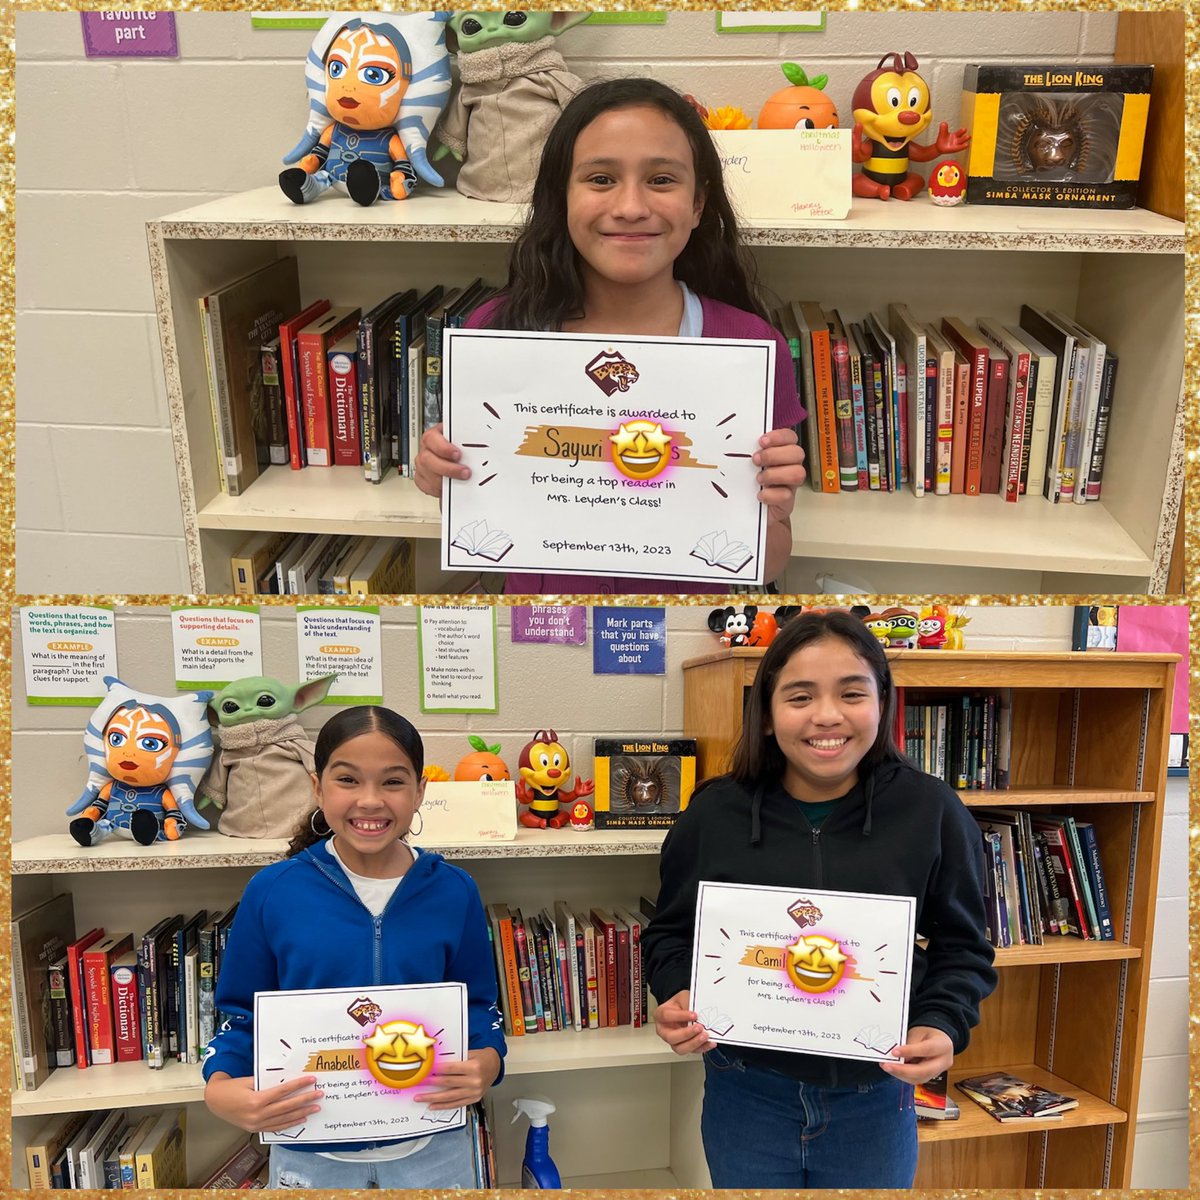 The top 3 readers in Mrs. Leyden’s class were recognized today!!! And they’re all AVID students! 🤩 We are so proud of y’all! 🐆❤️📚✨ #ThisIsTheWay @Agudo_OCPS @OCPSnews @AVID4College @AvidSoutheast